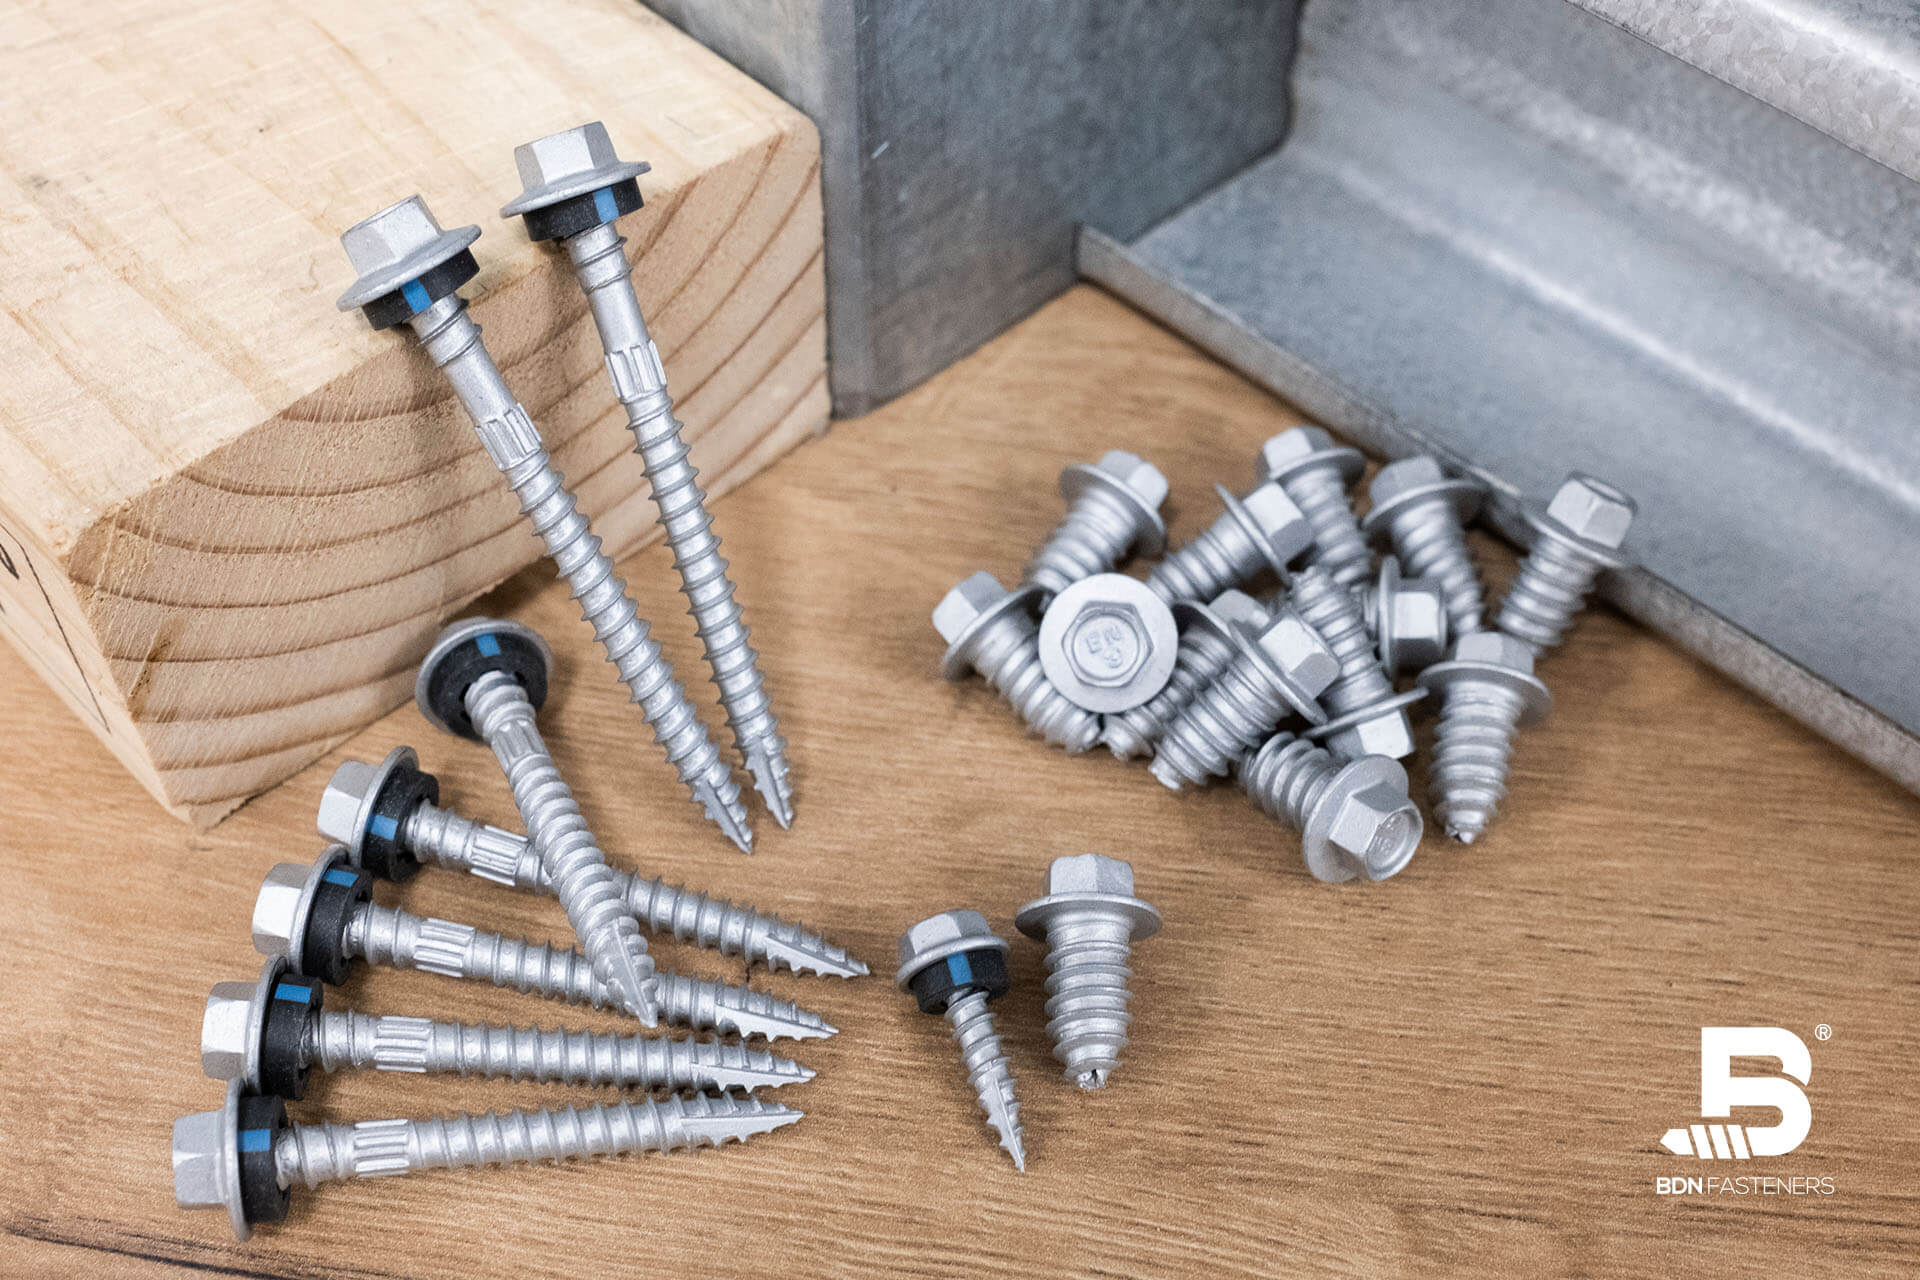 How to use self tapping screws for metal?